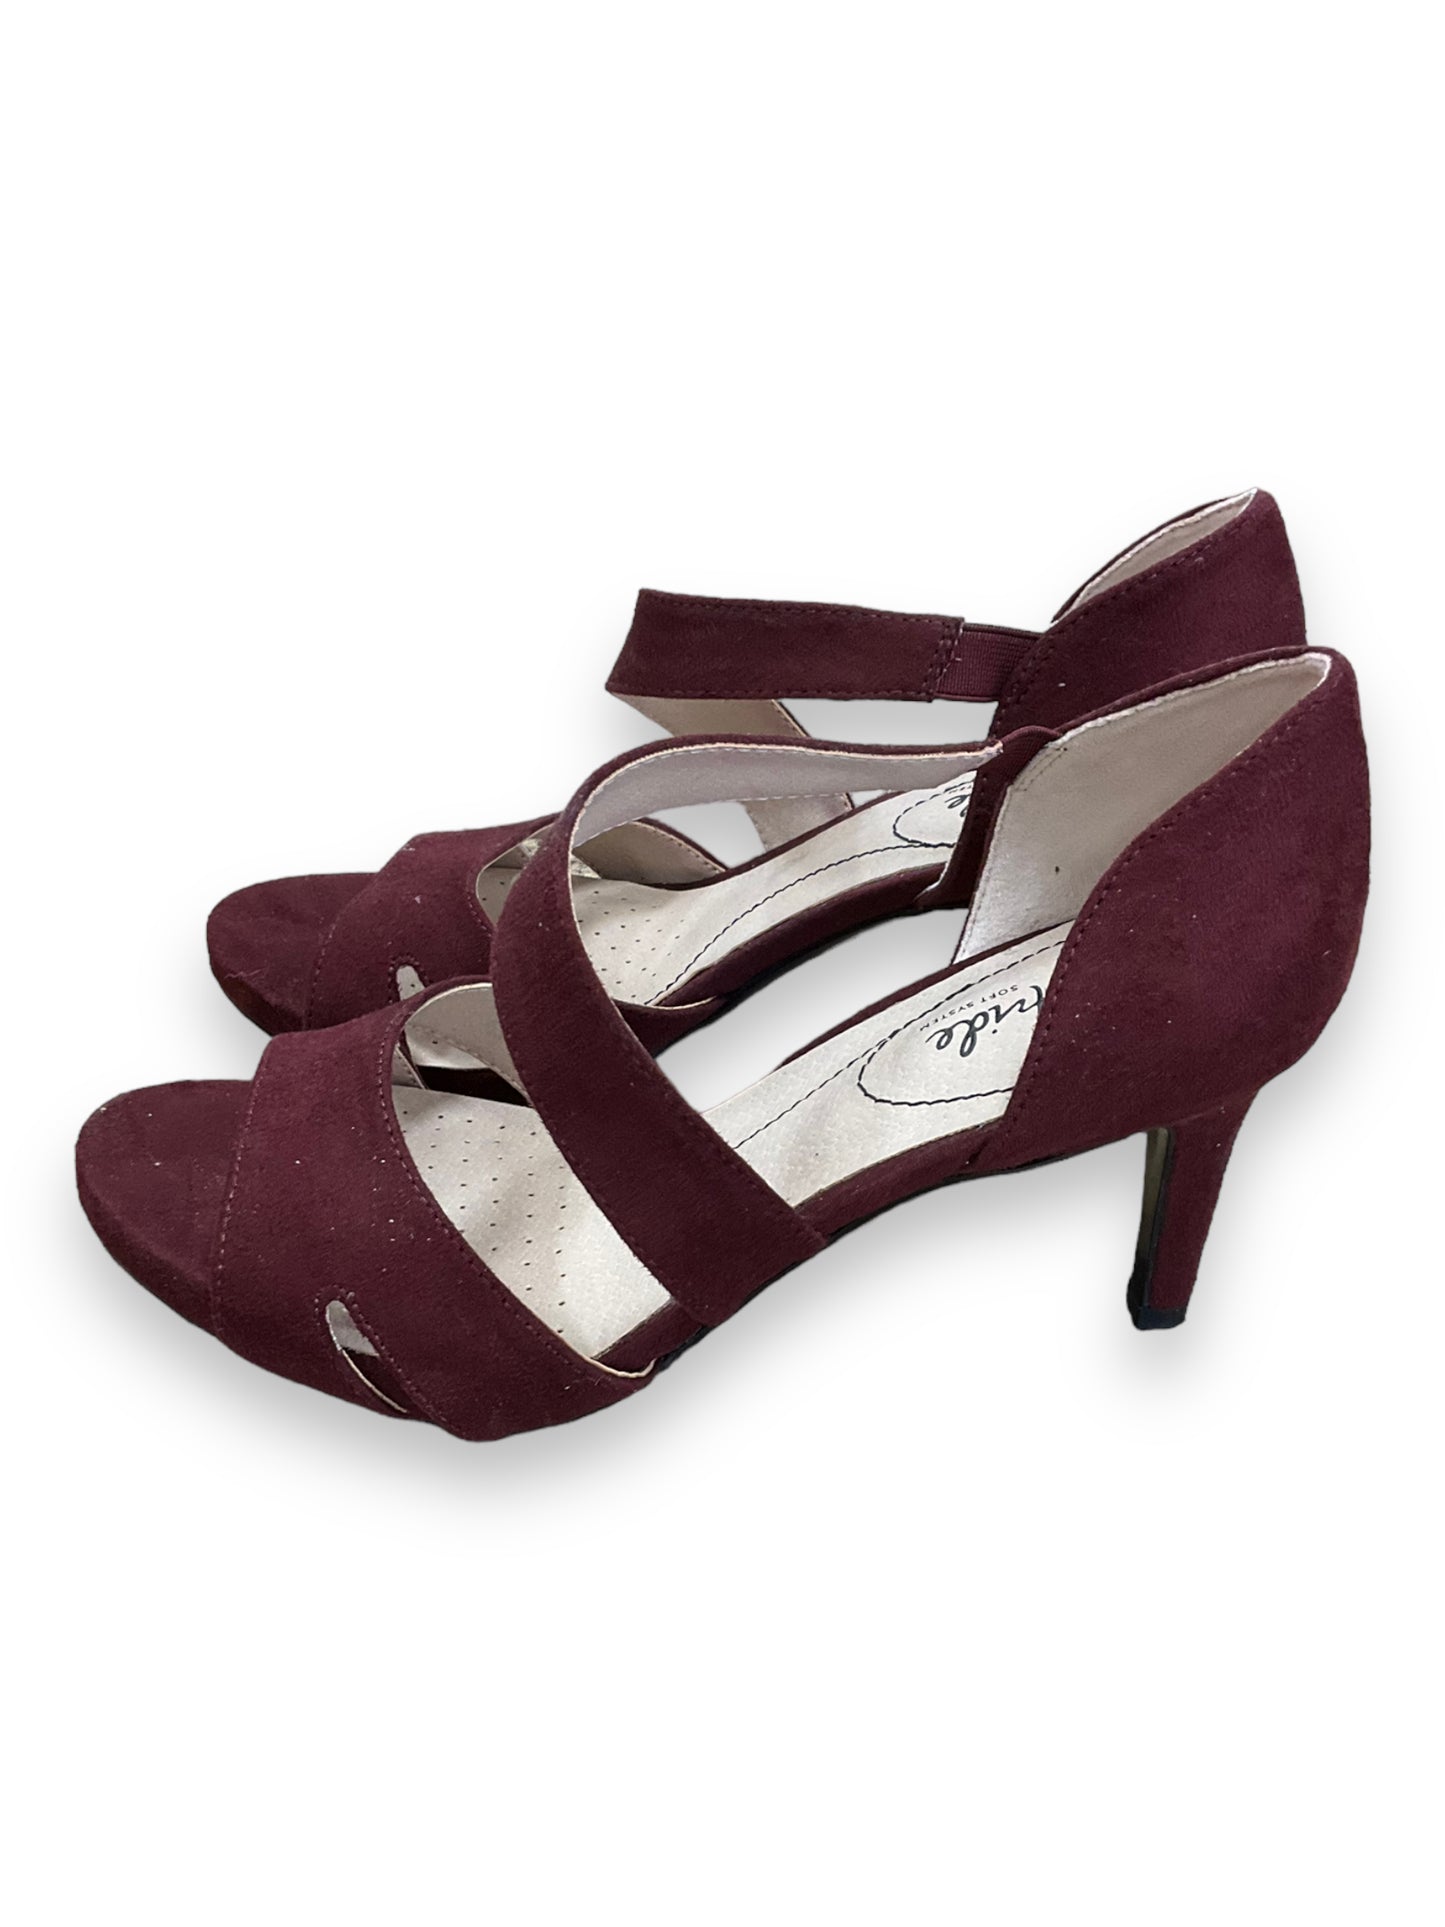 Shoes Heels Stiletto By Life Stride  Size: 7